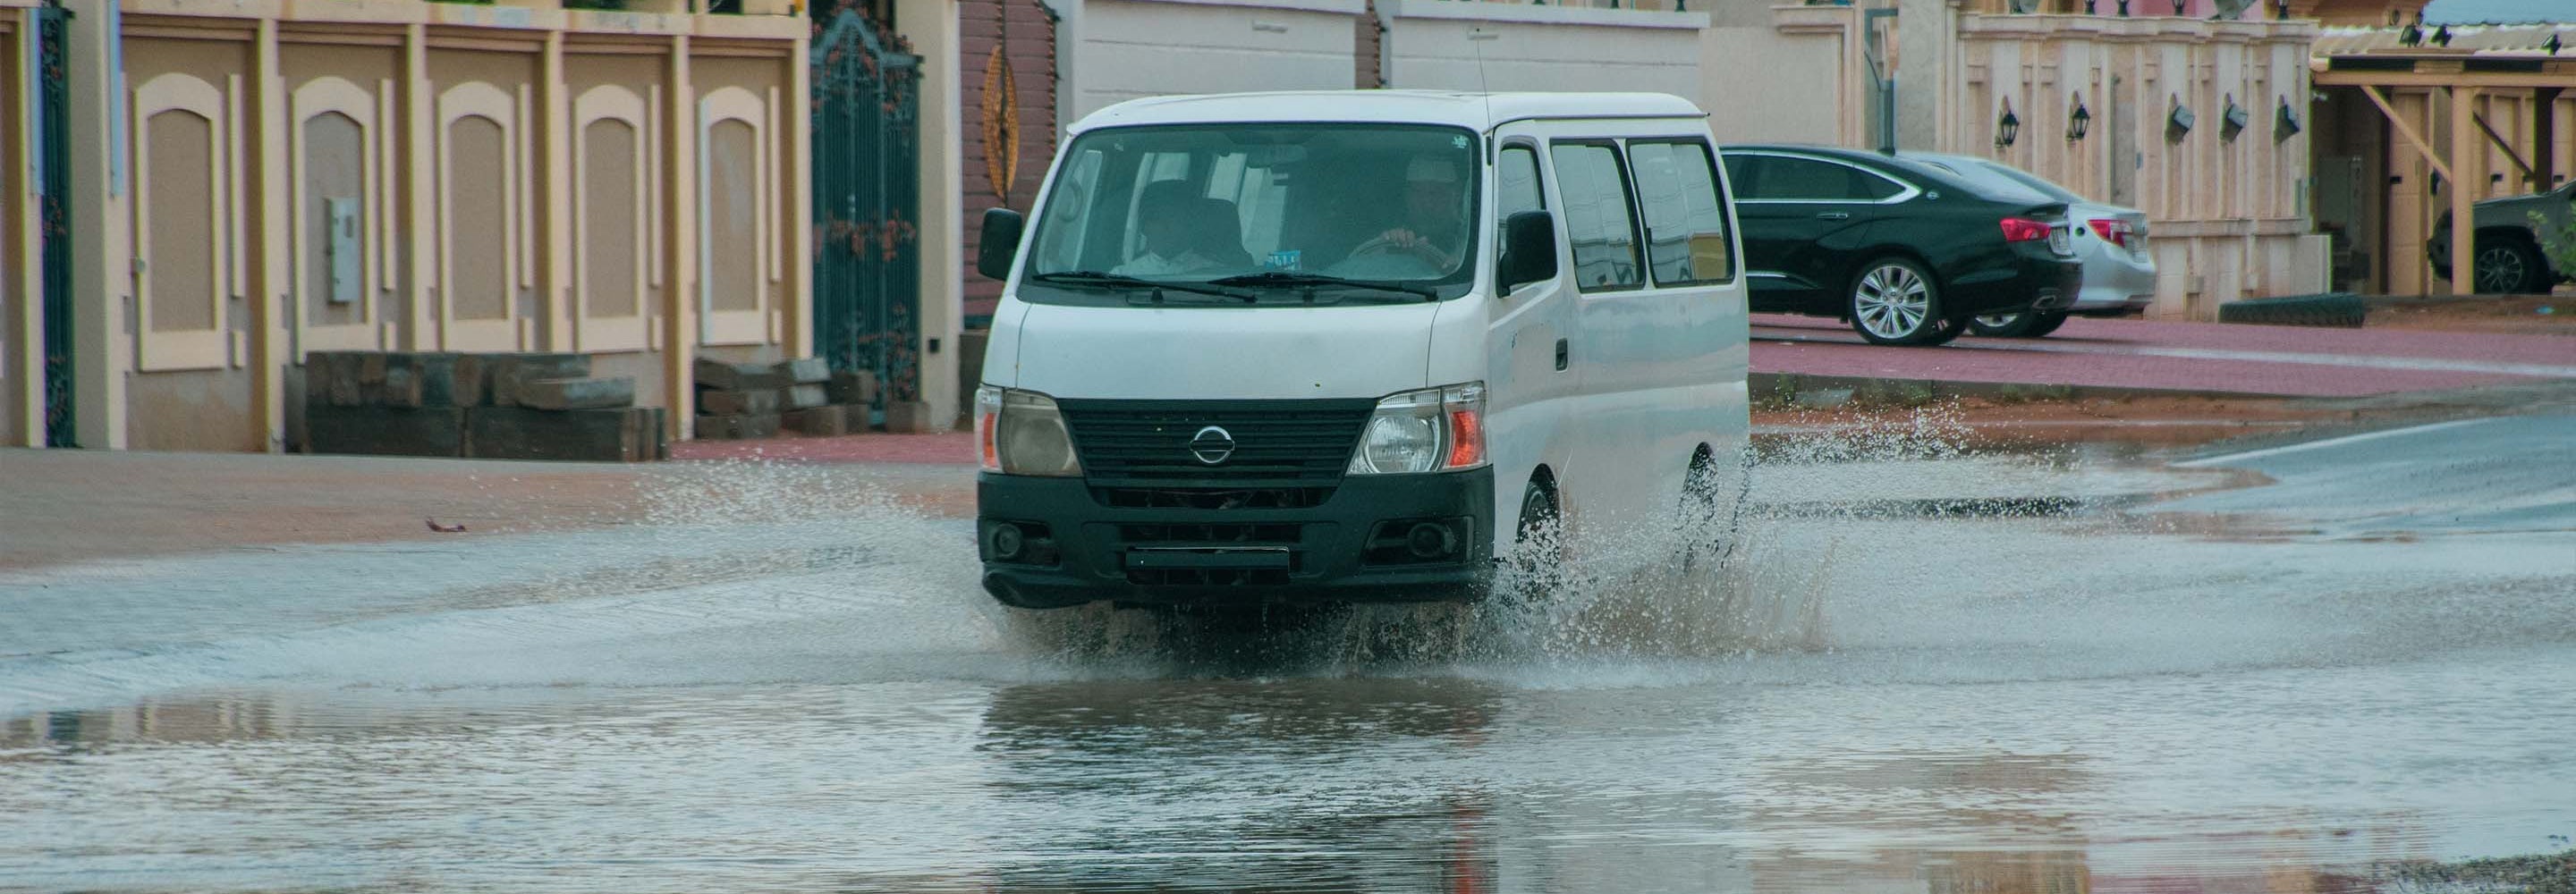 There is flooding in Al Ain. Protect yourself from mold and follow health recommendations. Click here.